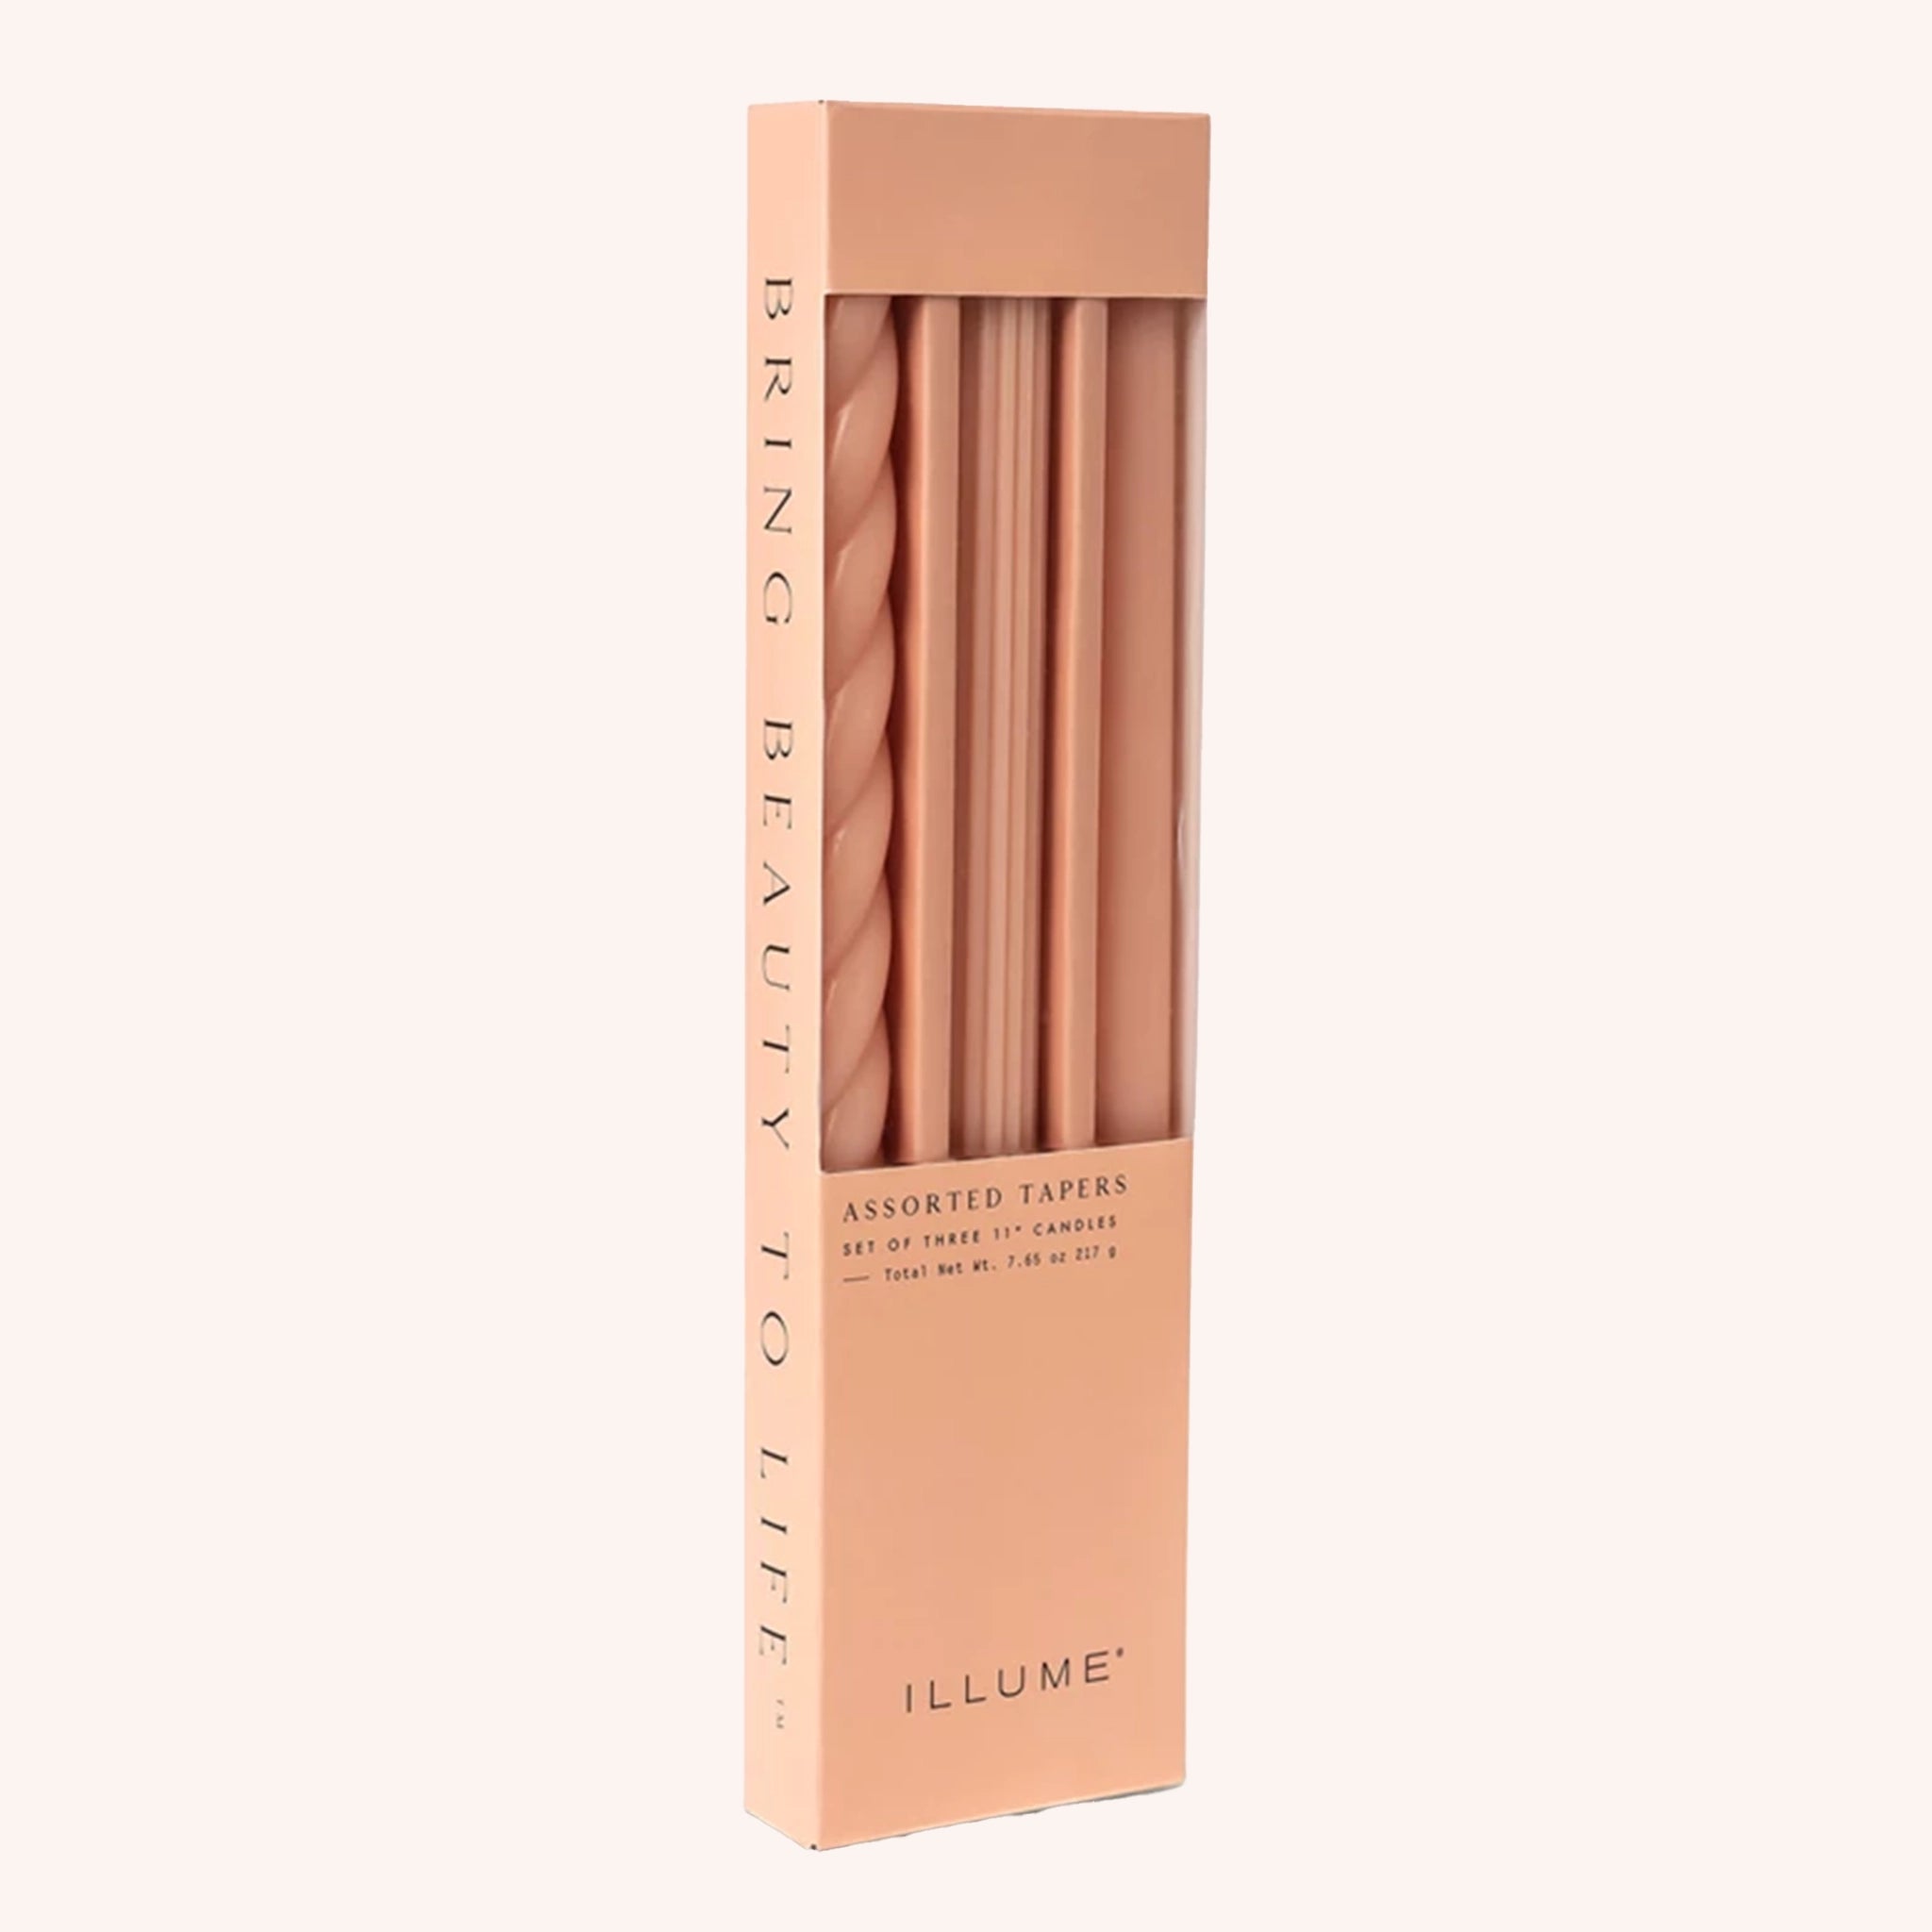 A box of three peach colored tapered candles, one has a twisted design, another has a vertically ribbed detail and the last candle is smooth. The box reads, "Illume Bring Beauty To Life Assorted Tapers".